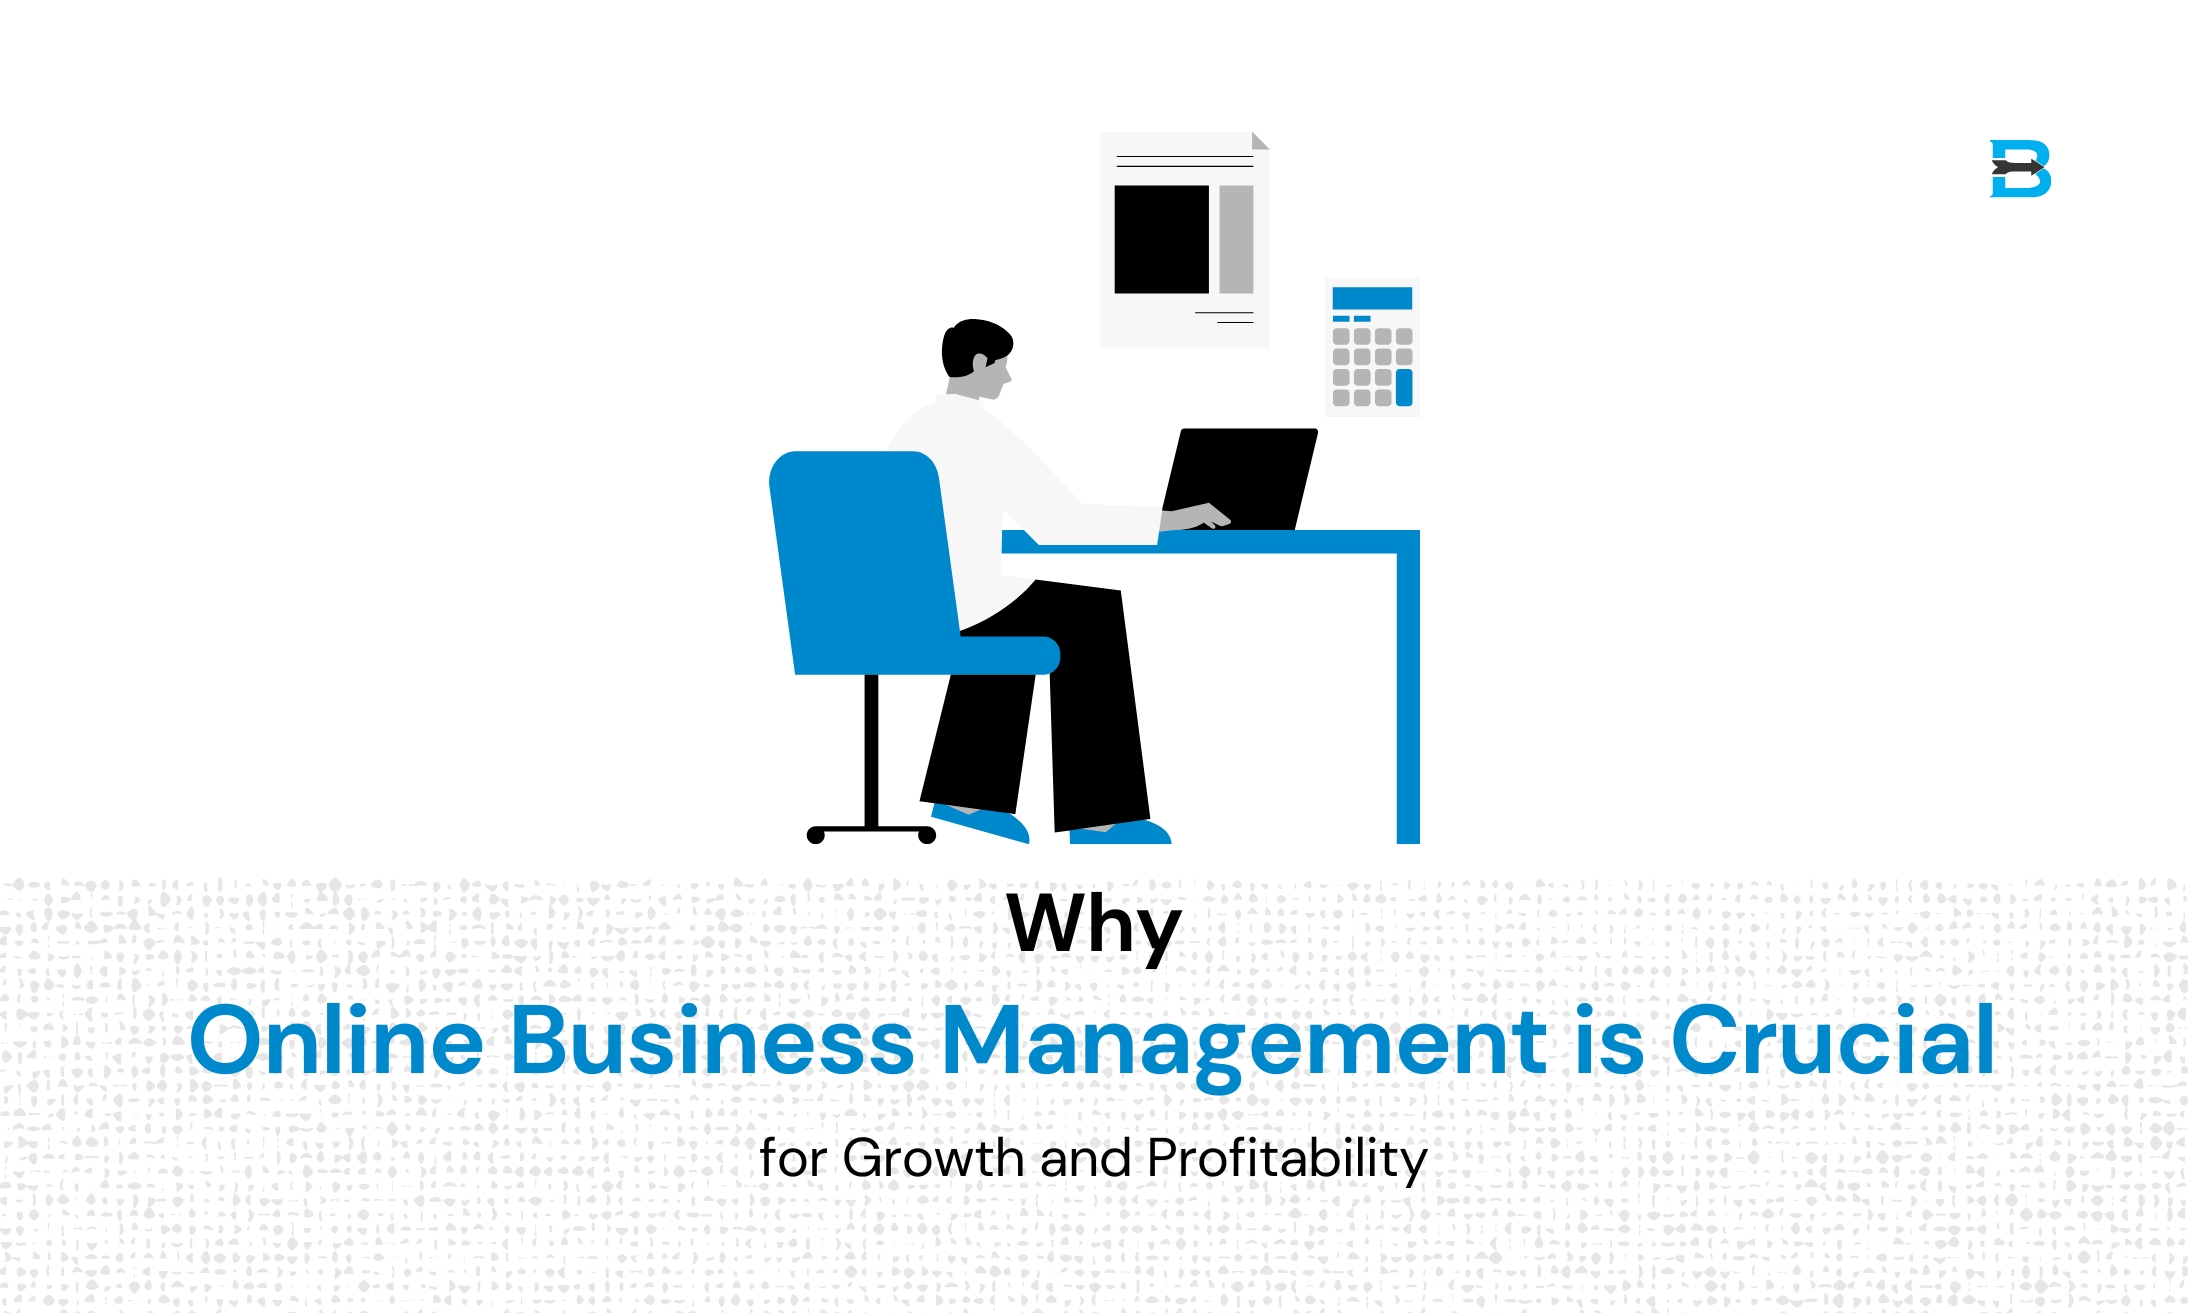 Why Online Business Management is Crucial for Growth and Profitability